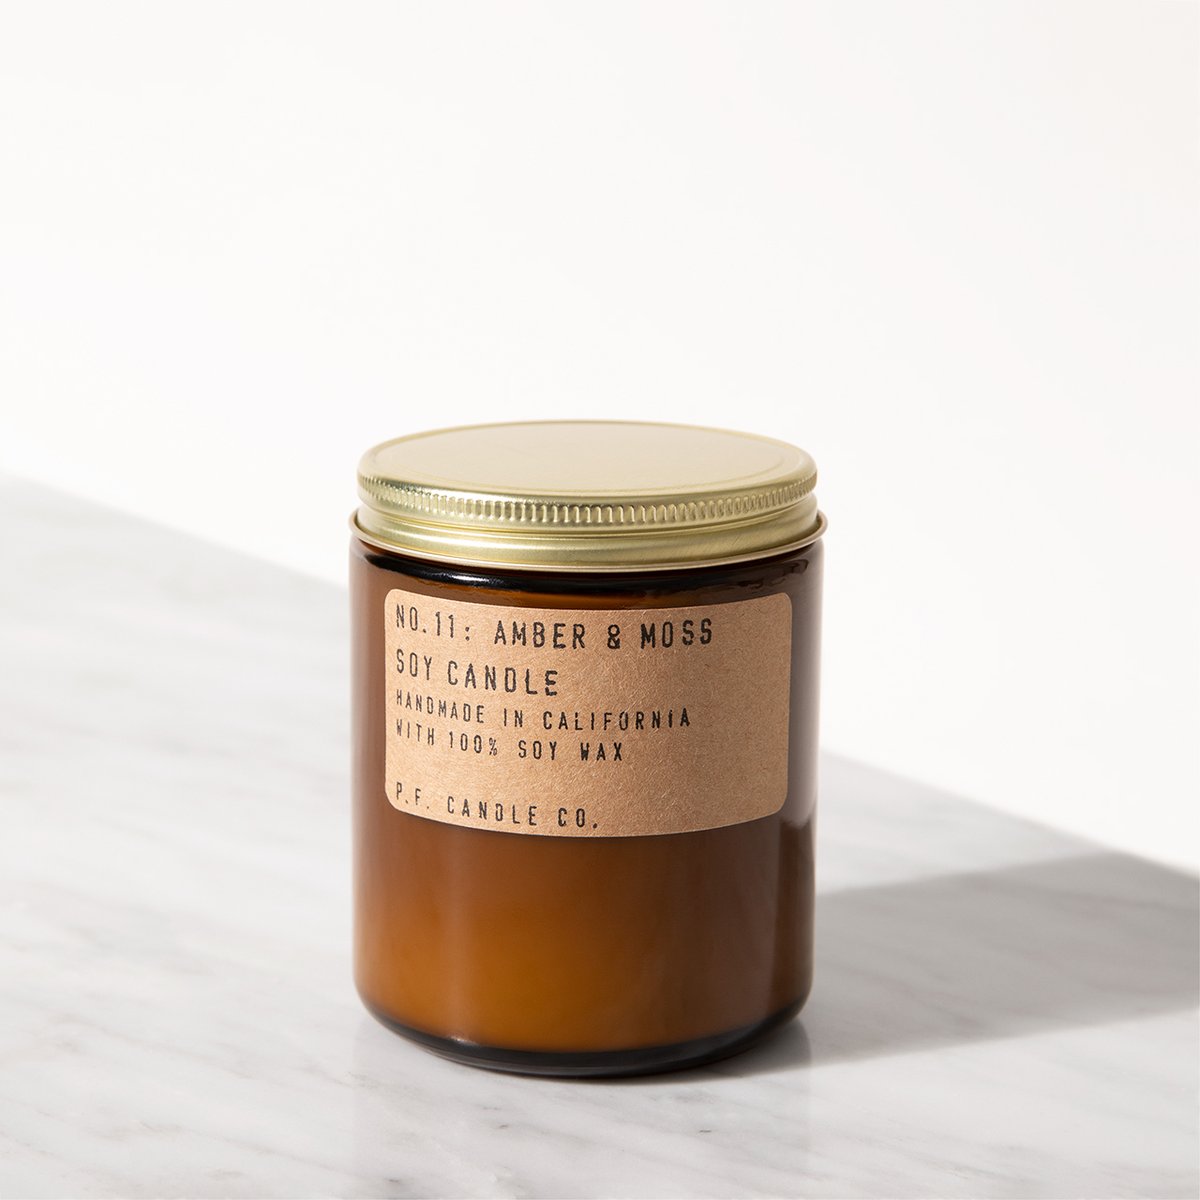 Amber & Moss Candle by P.F. Candle Co.